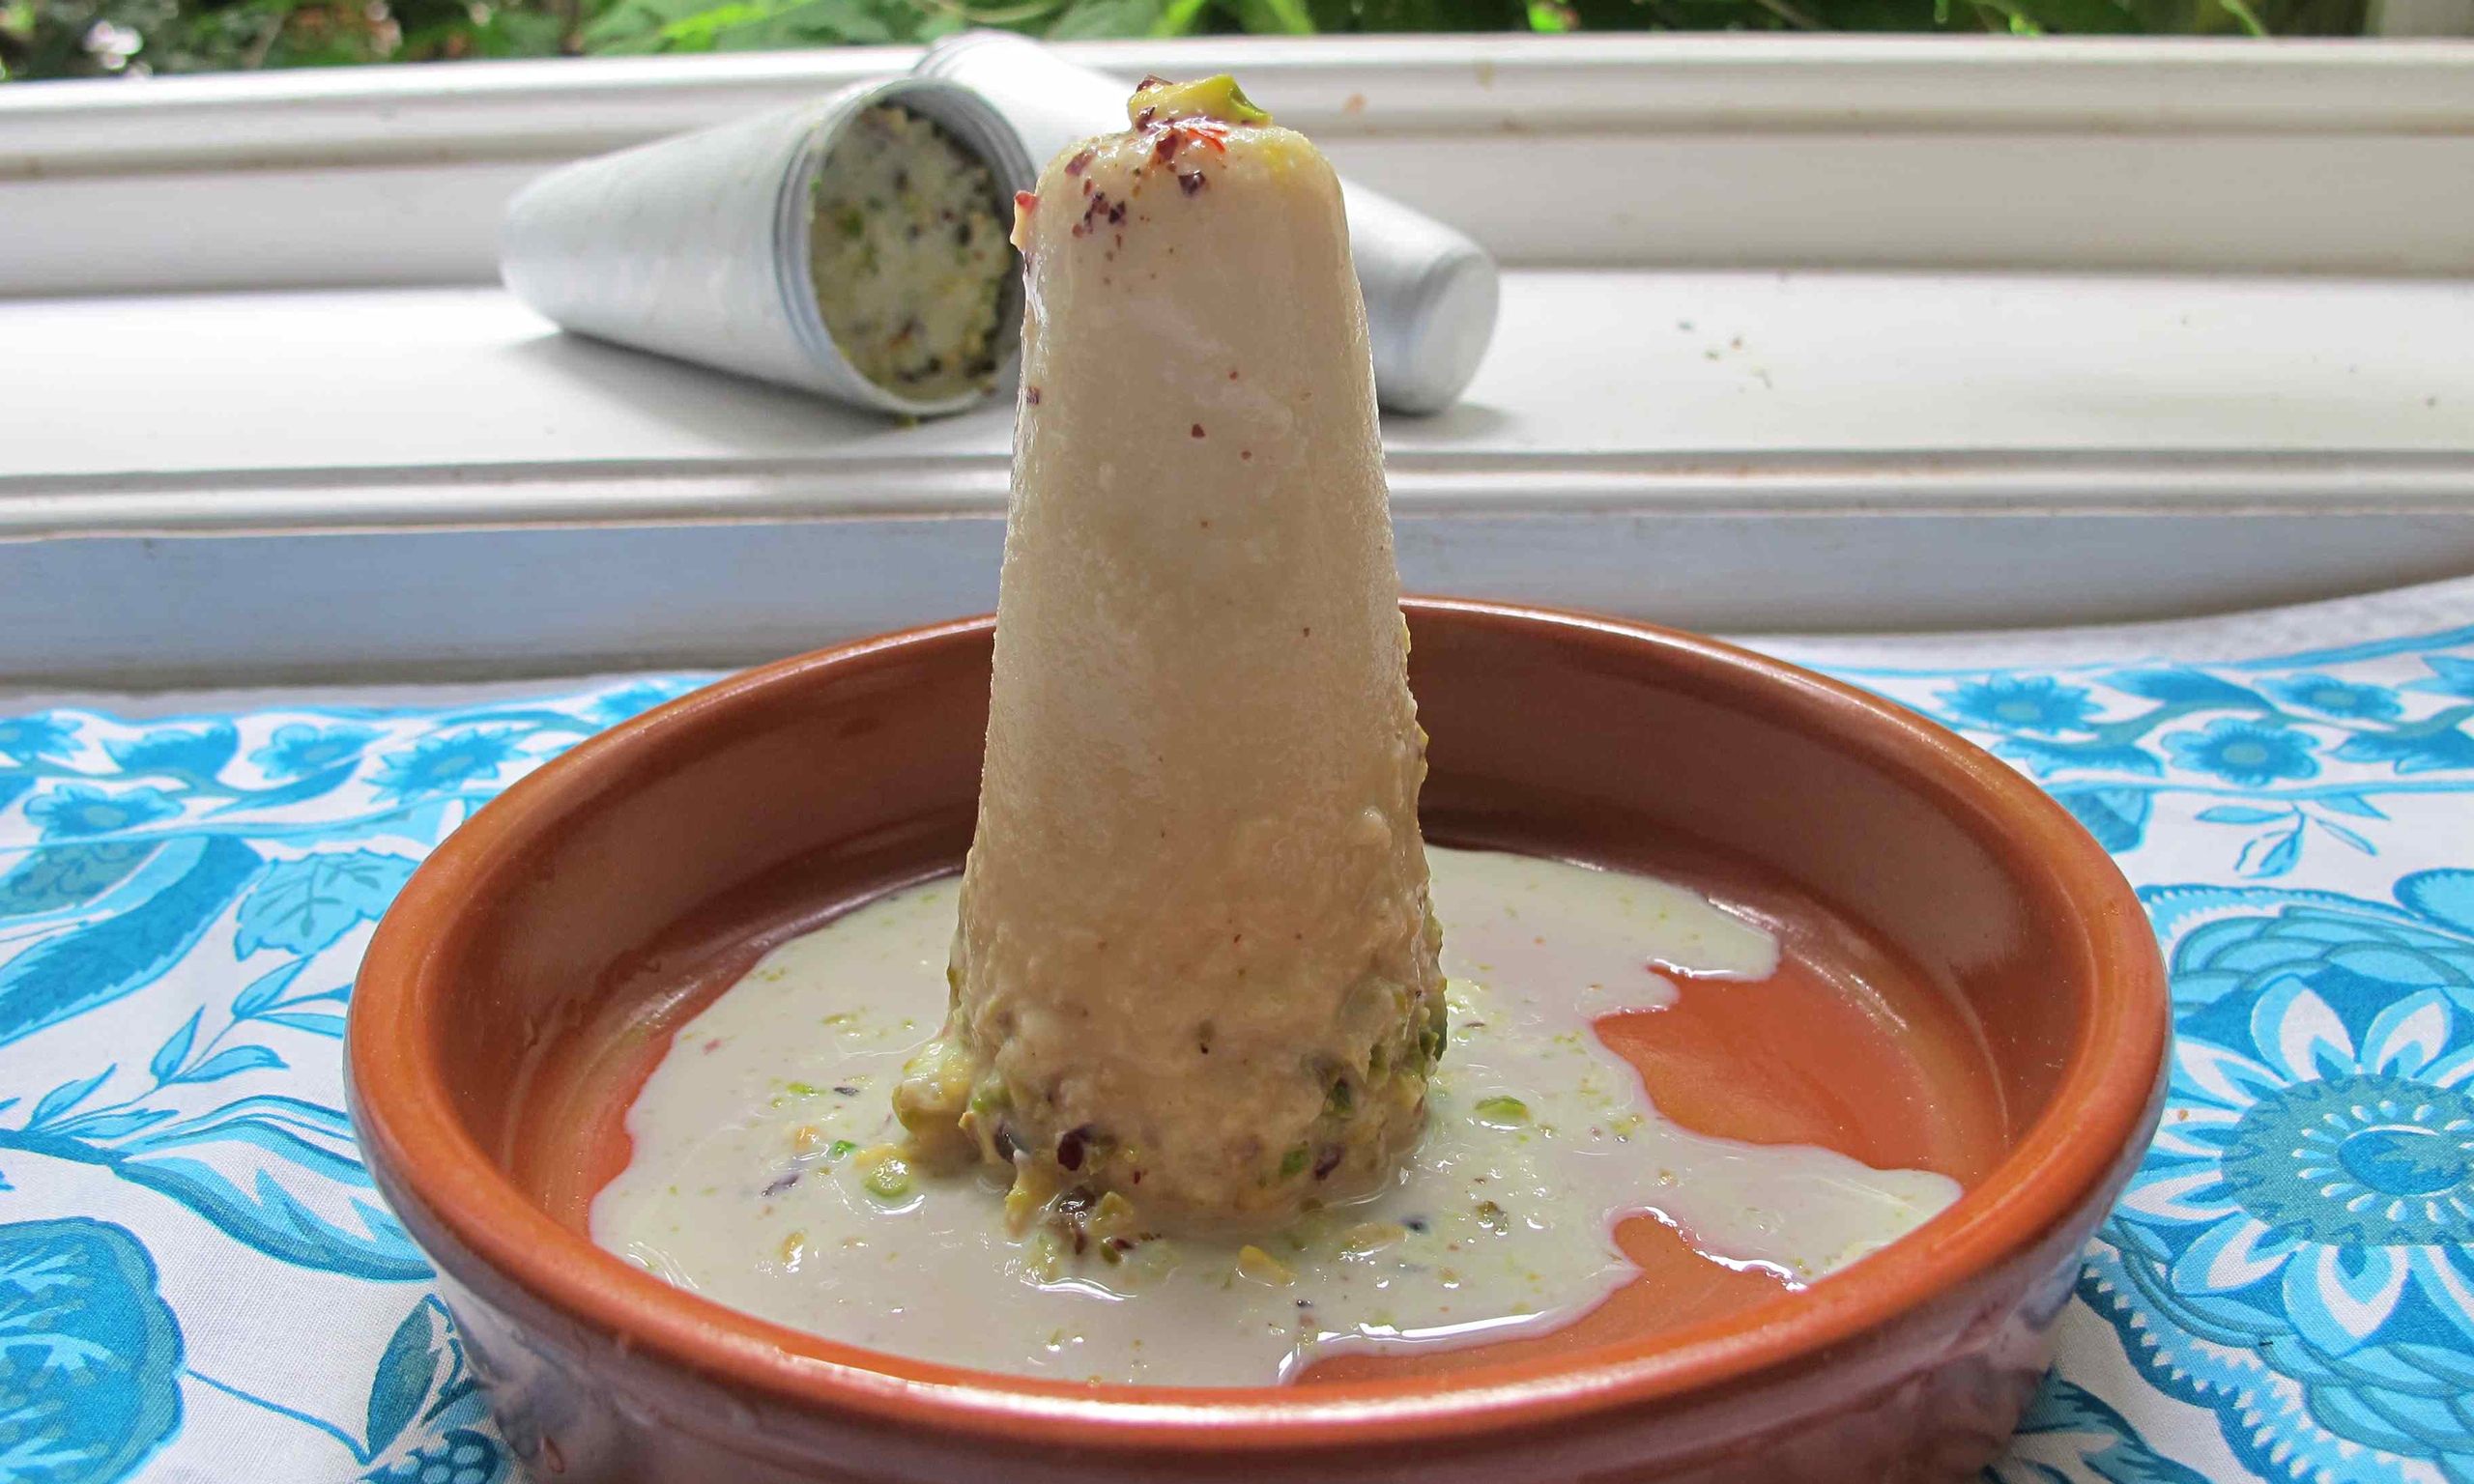 How to make the perfect kulfi | Life and style | The Guardian